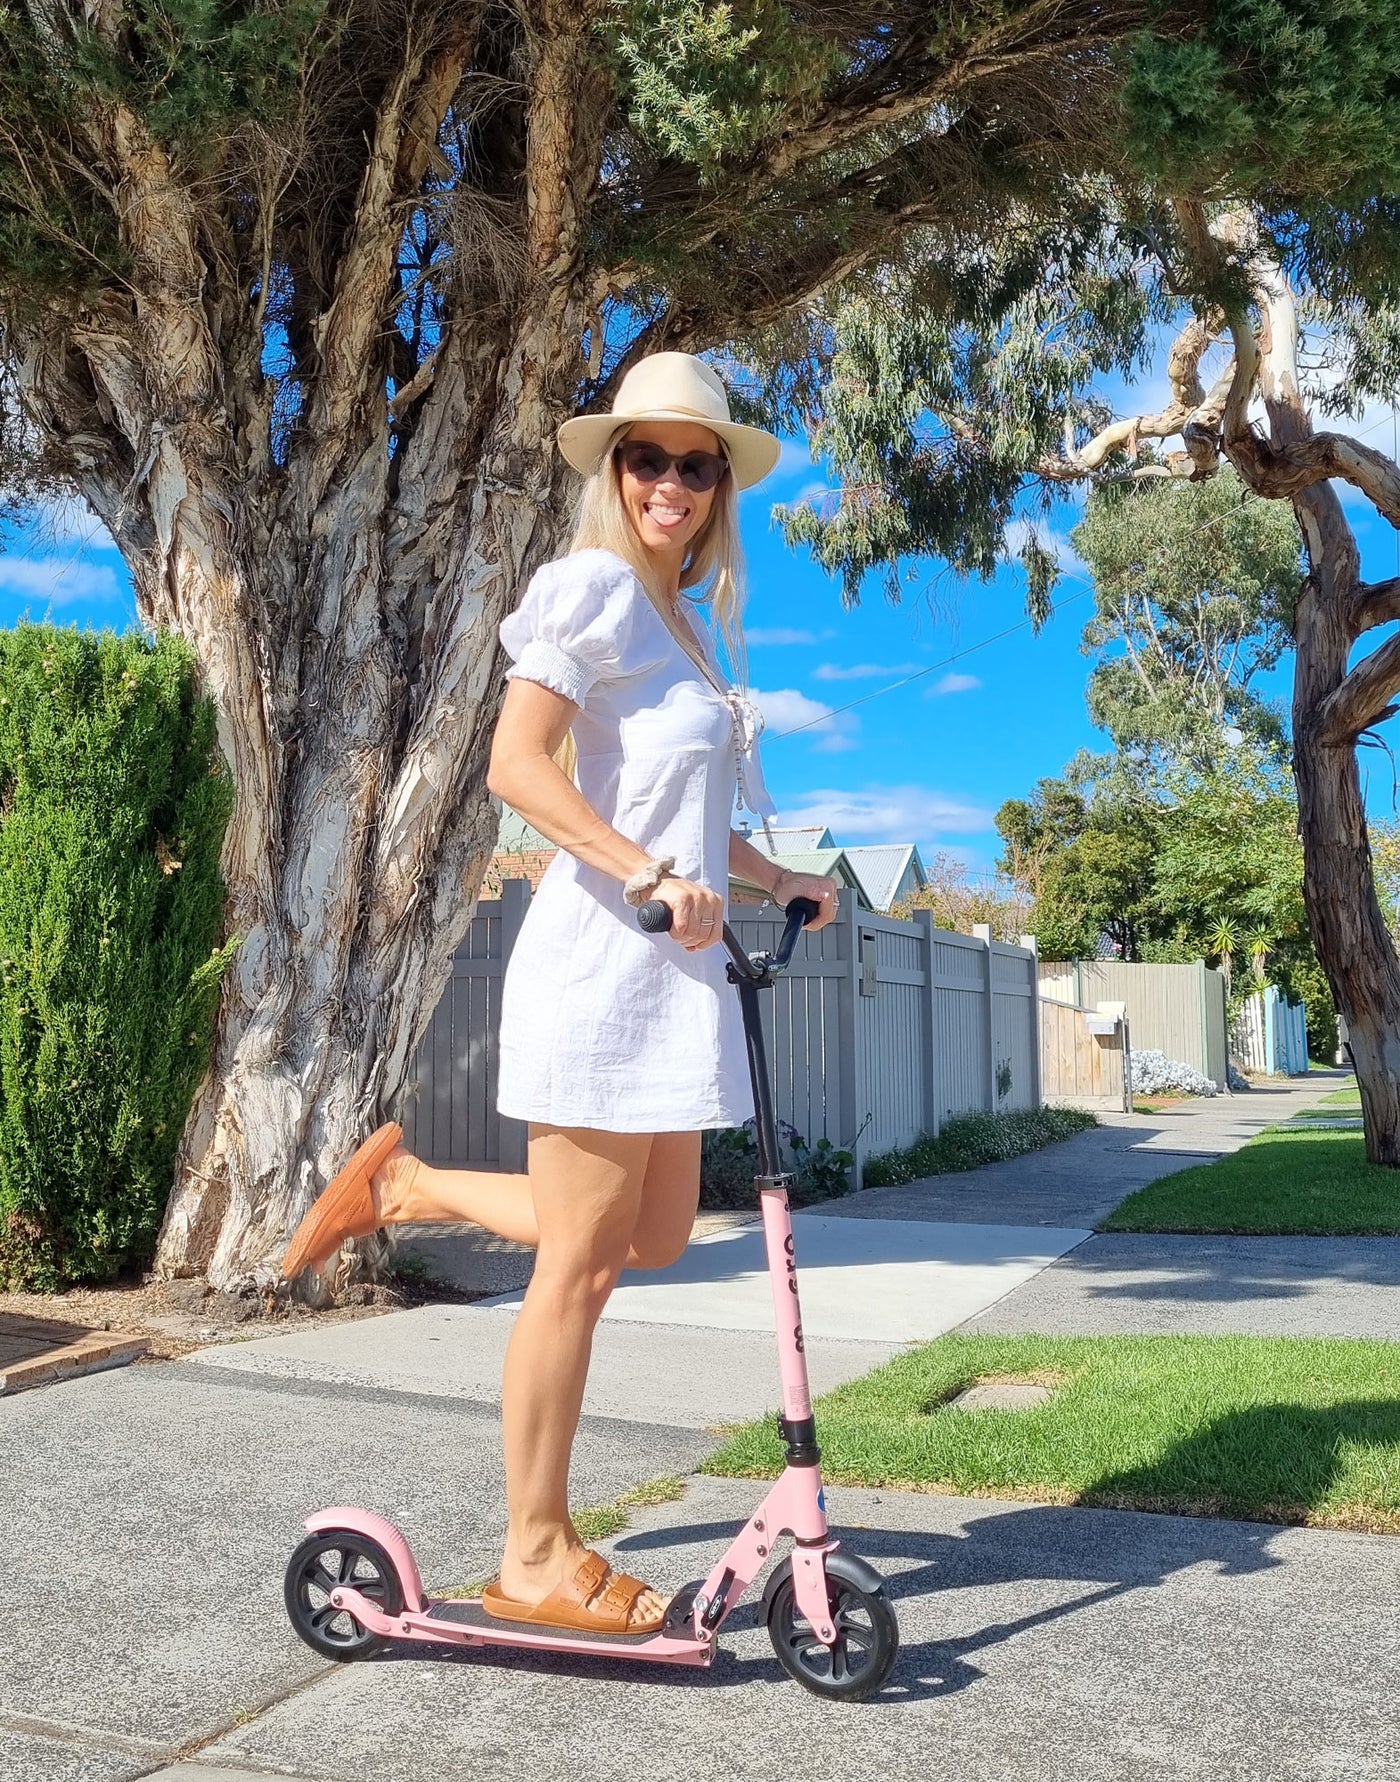 woman riding adult scooter in the sun